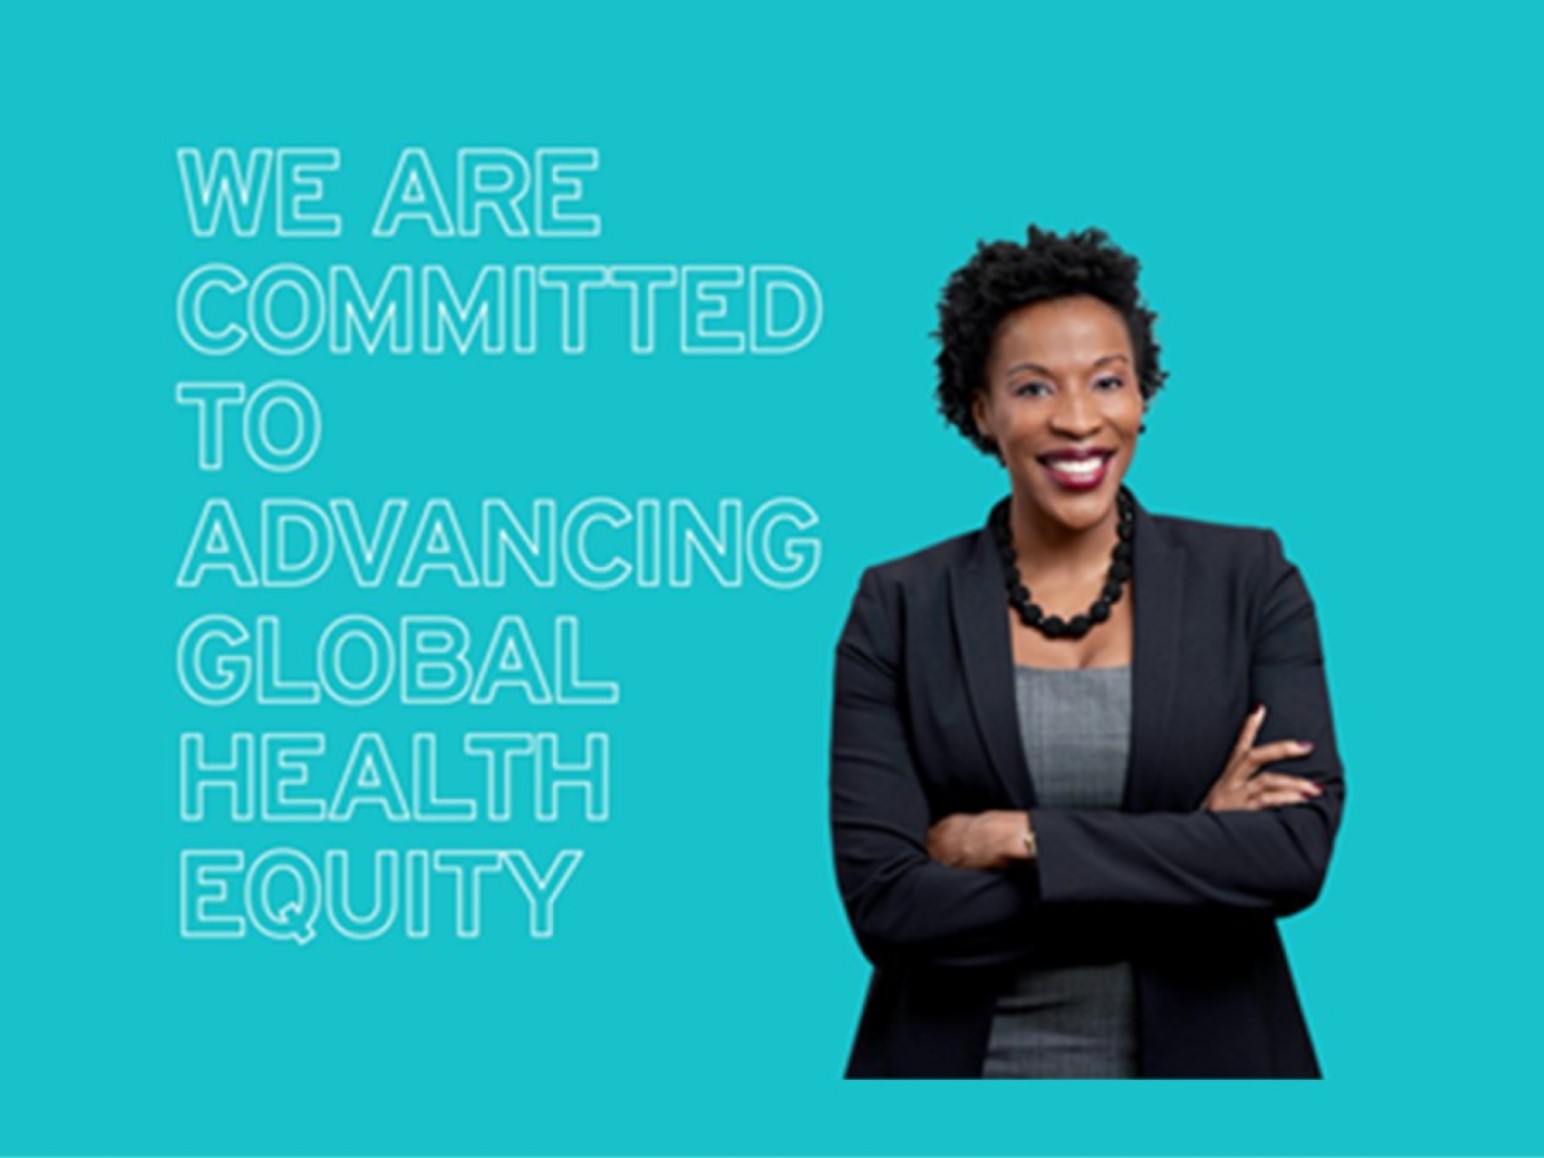 “We are committed to advancing global health equity”